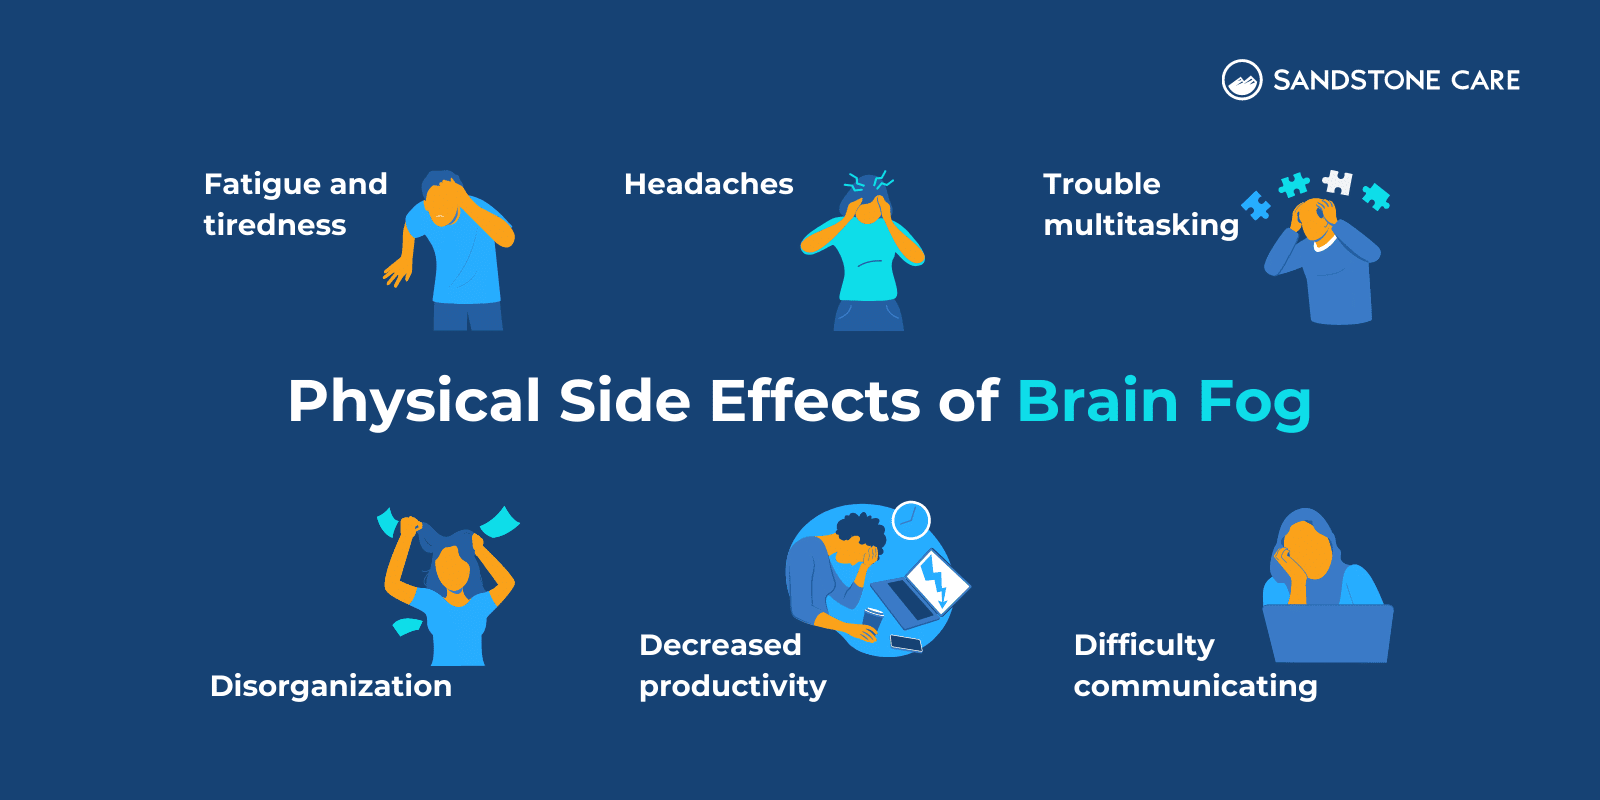 Physical Side effects of Brain Fog written in the middle of the infographic surrounded by 6 different side effects and relevant illustrations